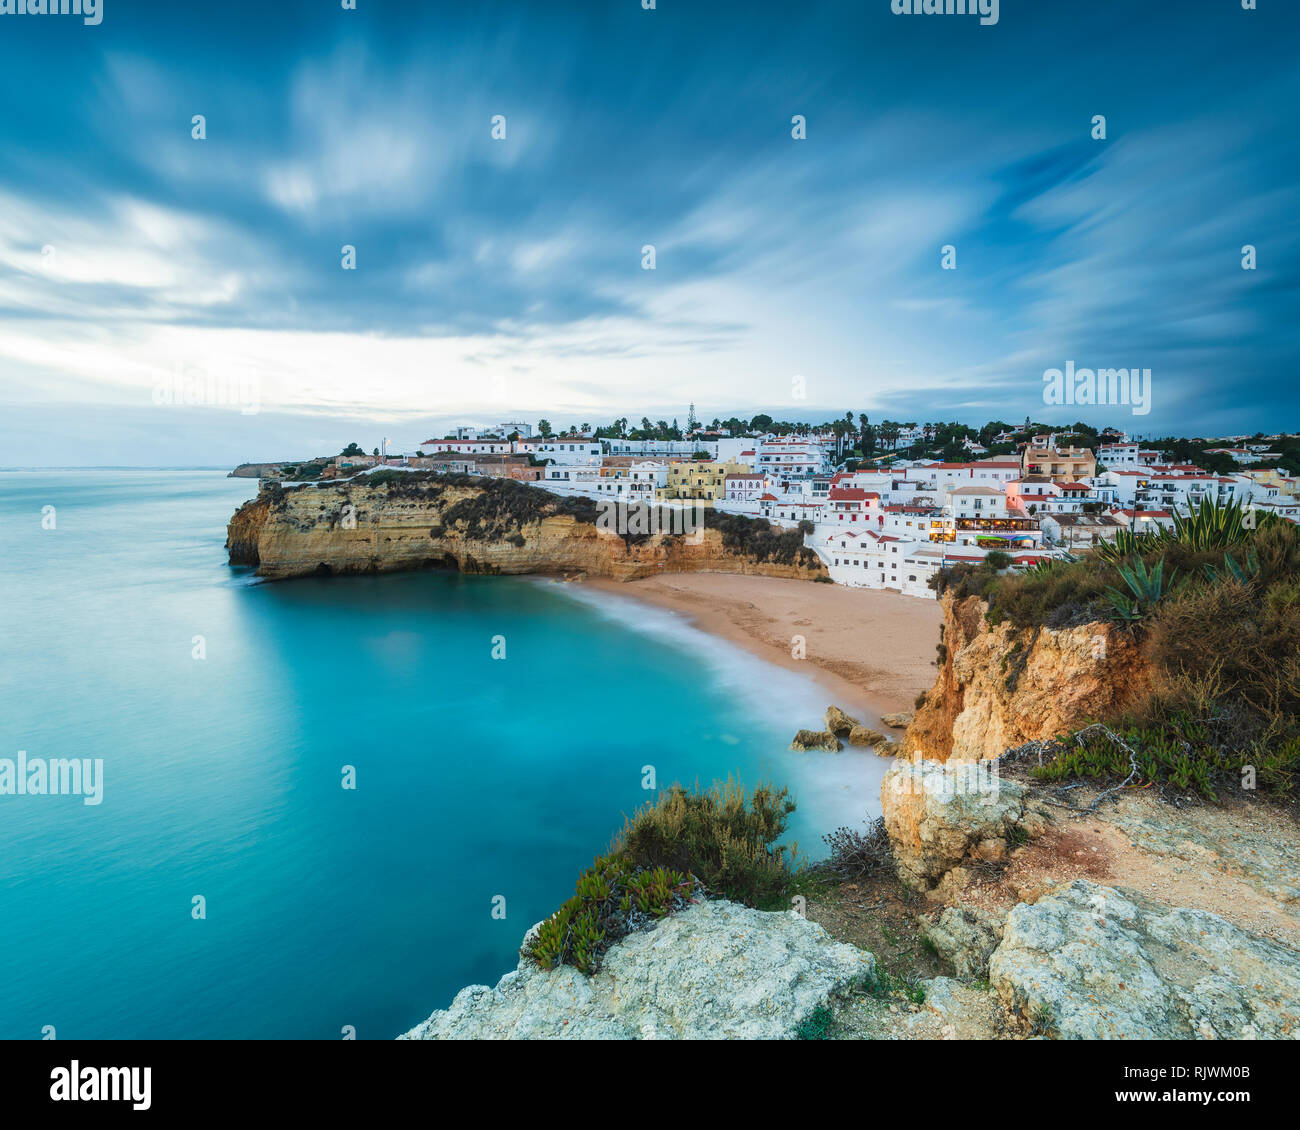 Rugged cliffs and village, high level view, Carvoeiro, Algarve, Portugal, Europe Stock Photo